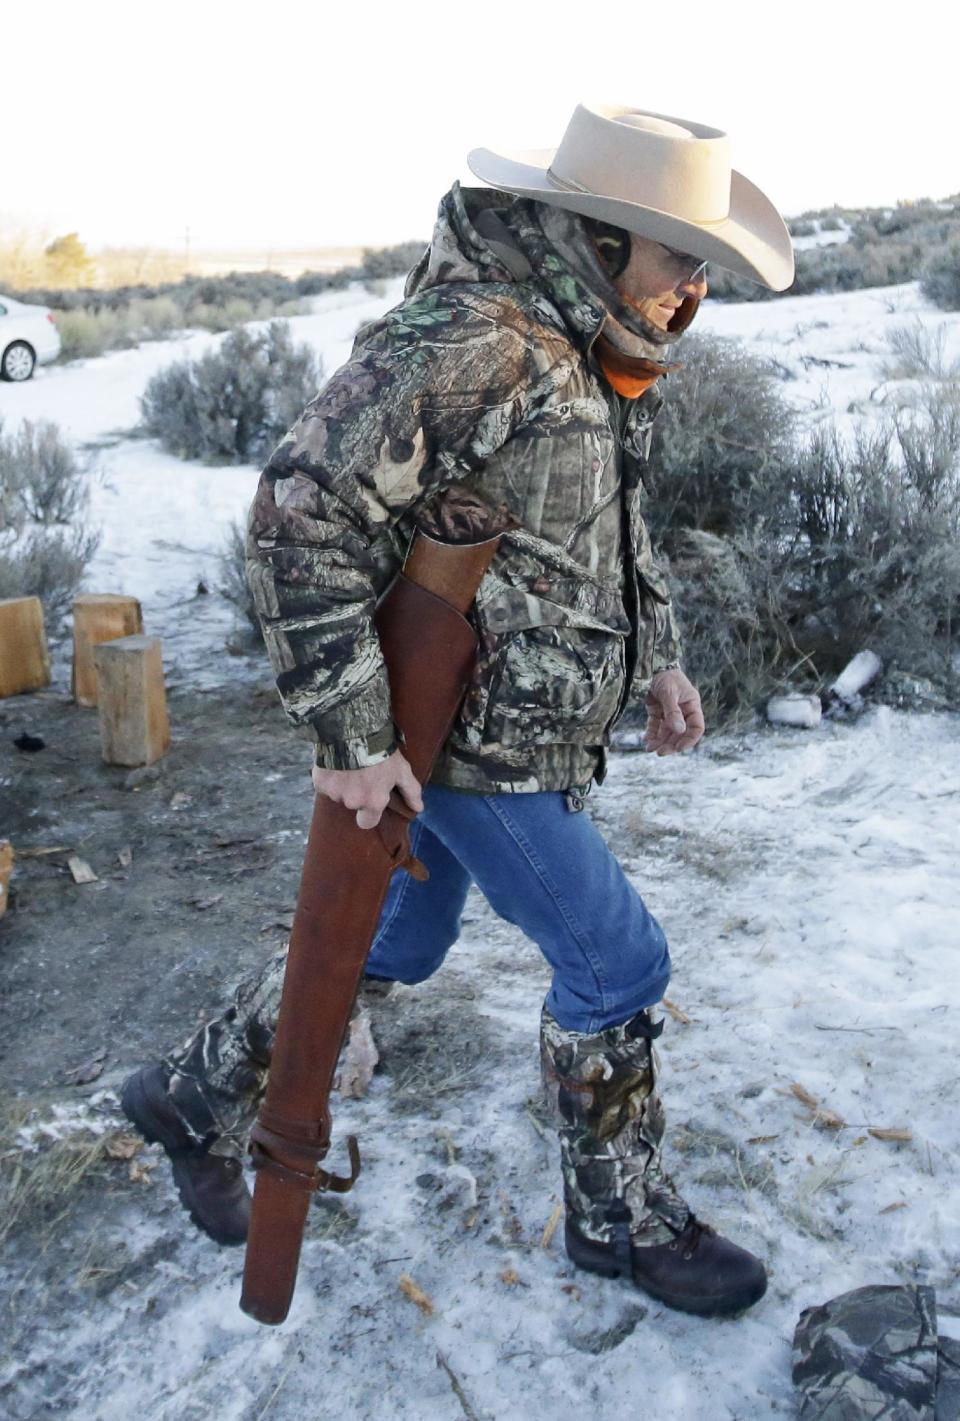 FILE--In this Jan. 6, 2016, file photo, Arizona rancher LaVoy Finicum carries his rifle after standing guard all night at the Malheur National Wildlife Refuge near Burns, Ore. Finicum's widow, Jeanette Finicum, and their children are planning to hold a meeting in John Day, Ore., Jan. 28, 2017, in an effort to continue with his mission. (AP photo/Rick Bowmer, file)